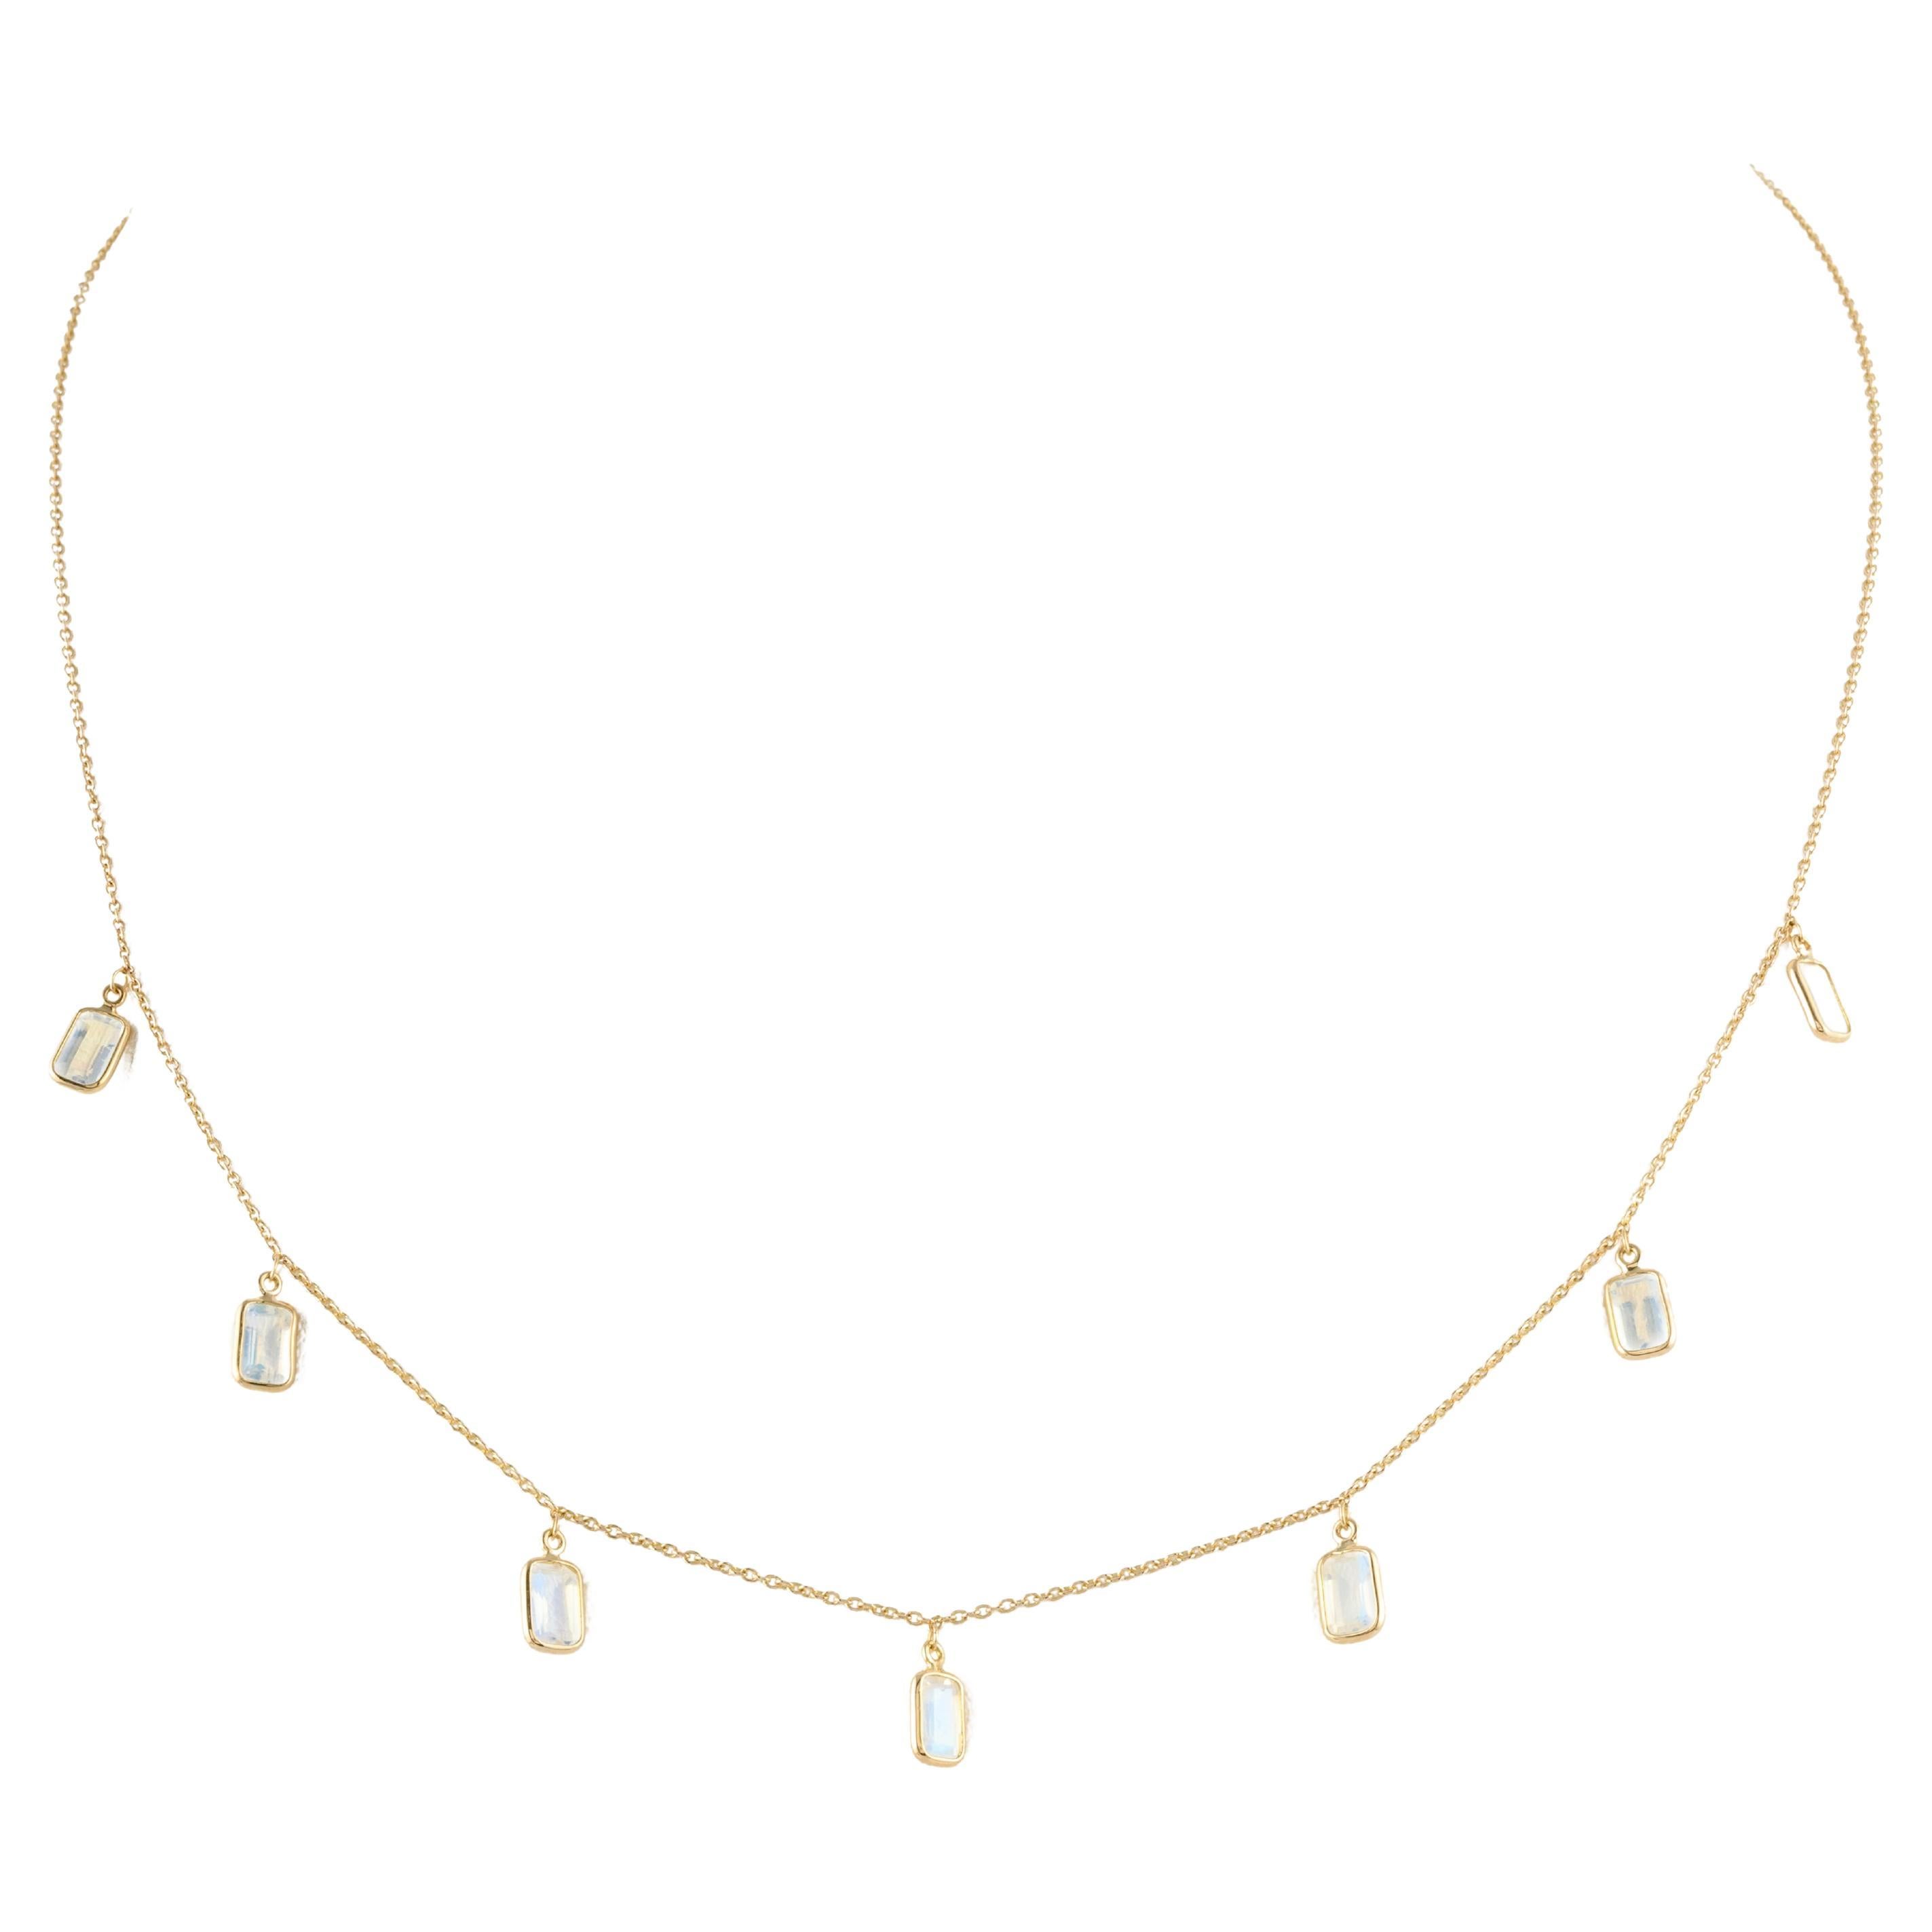 Rainbow Moonstone Stacking Necklace 18k Solid Yellow Gold, Sister Gift Christmas